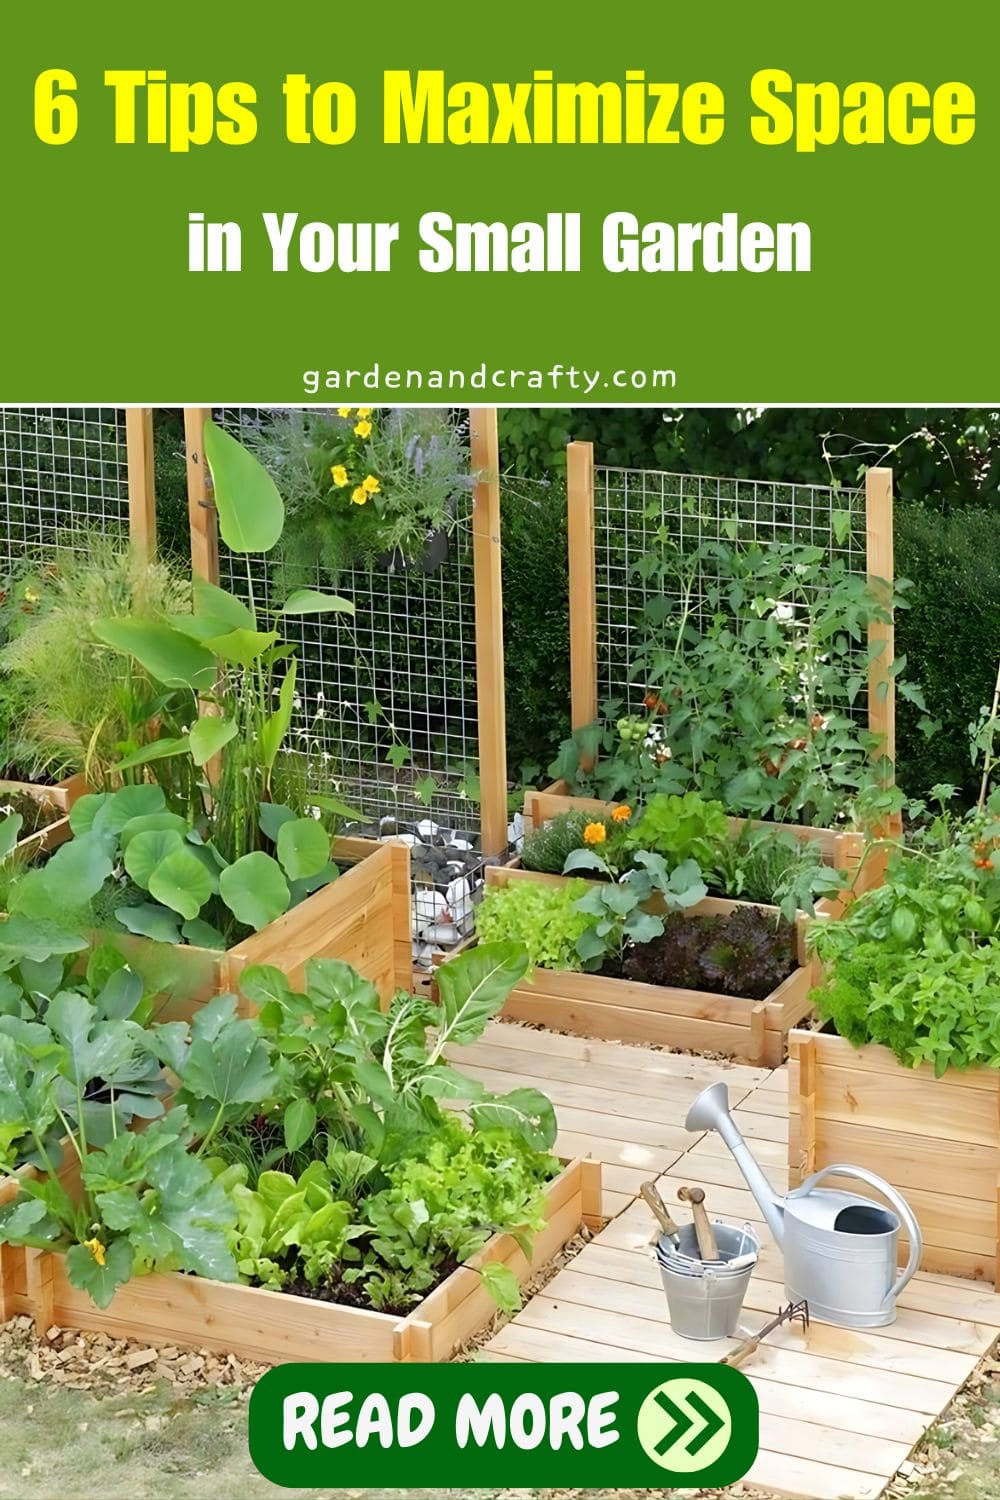 6 Tips for Maximizing Space in Your Small Garden